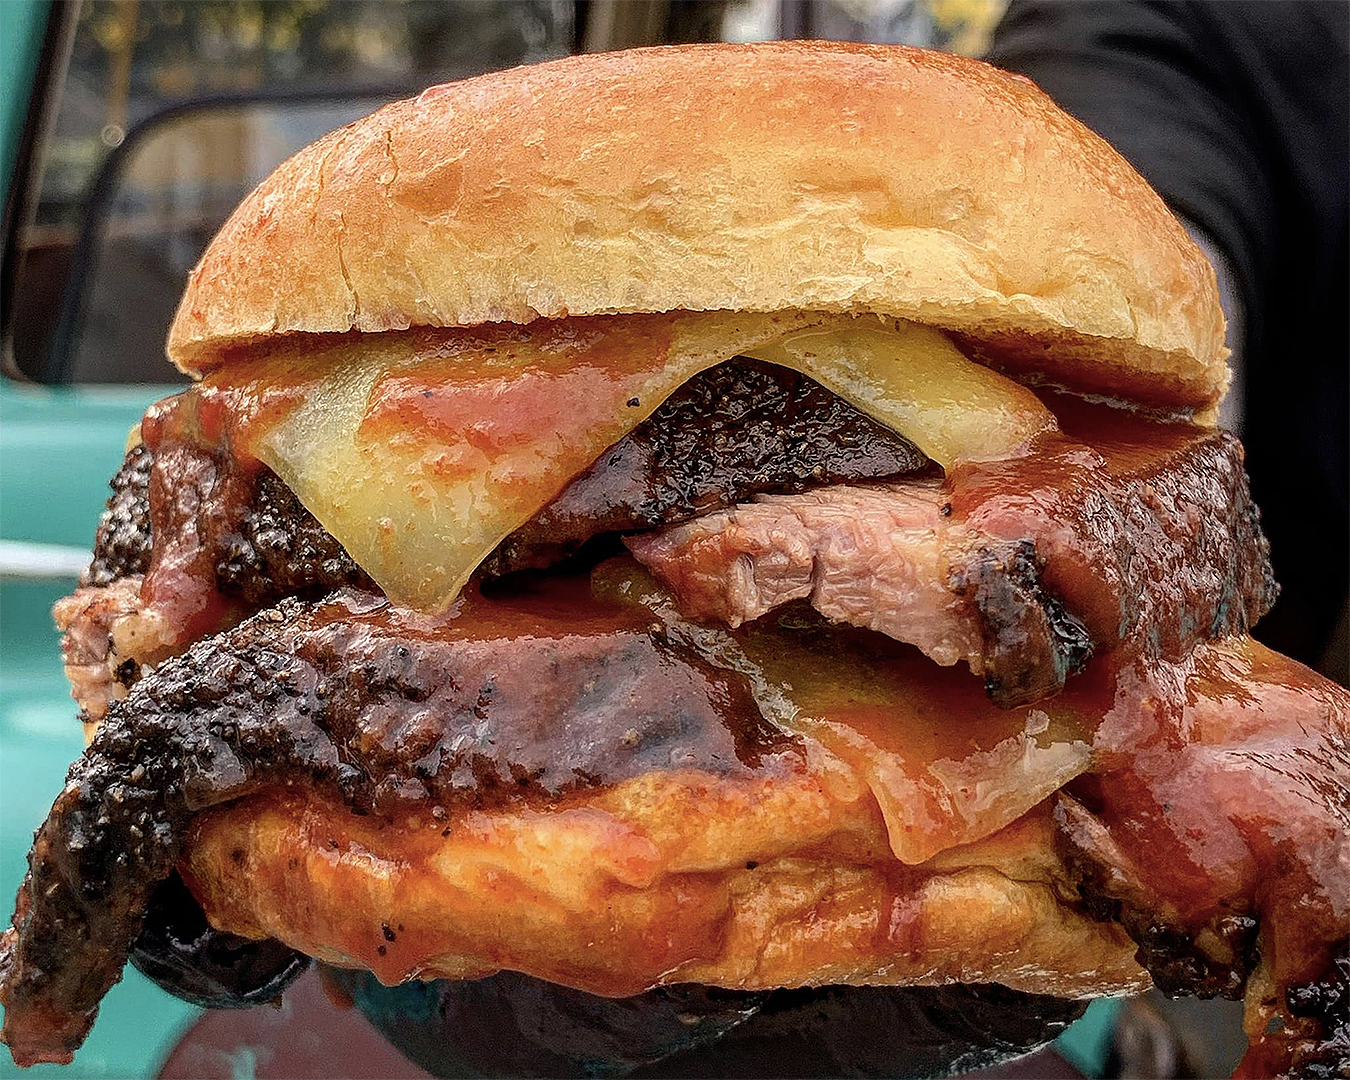 A loaded brisket burger from Blue Ox Babe BBQ, one of the best American food joints in Auckland.